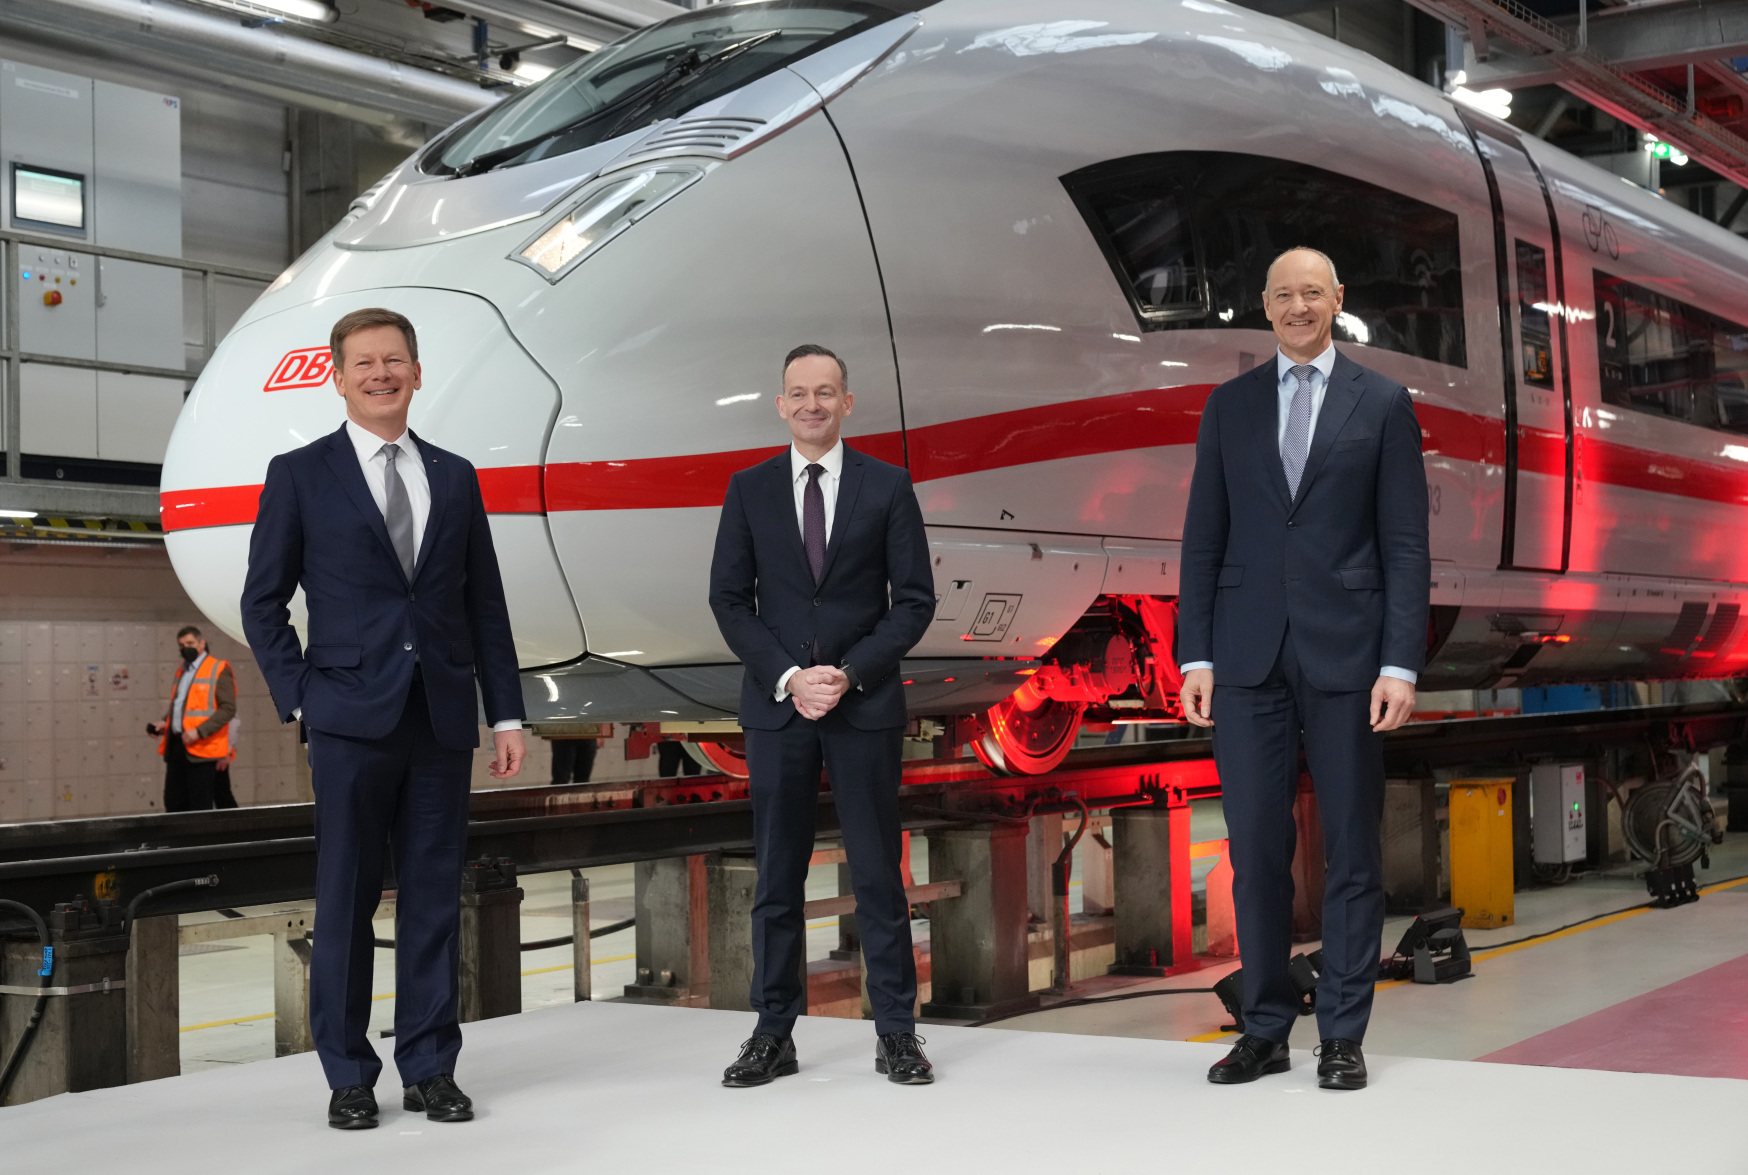 Deutsche Bahn purchases 43 new ICE 3 neo trains from Siemens Mobility